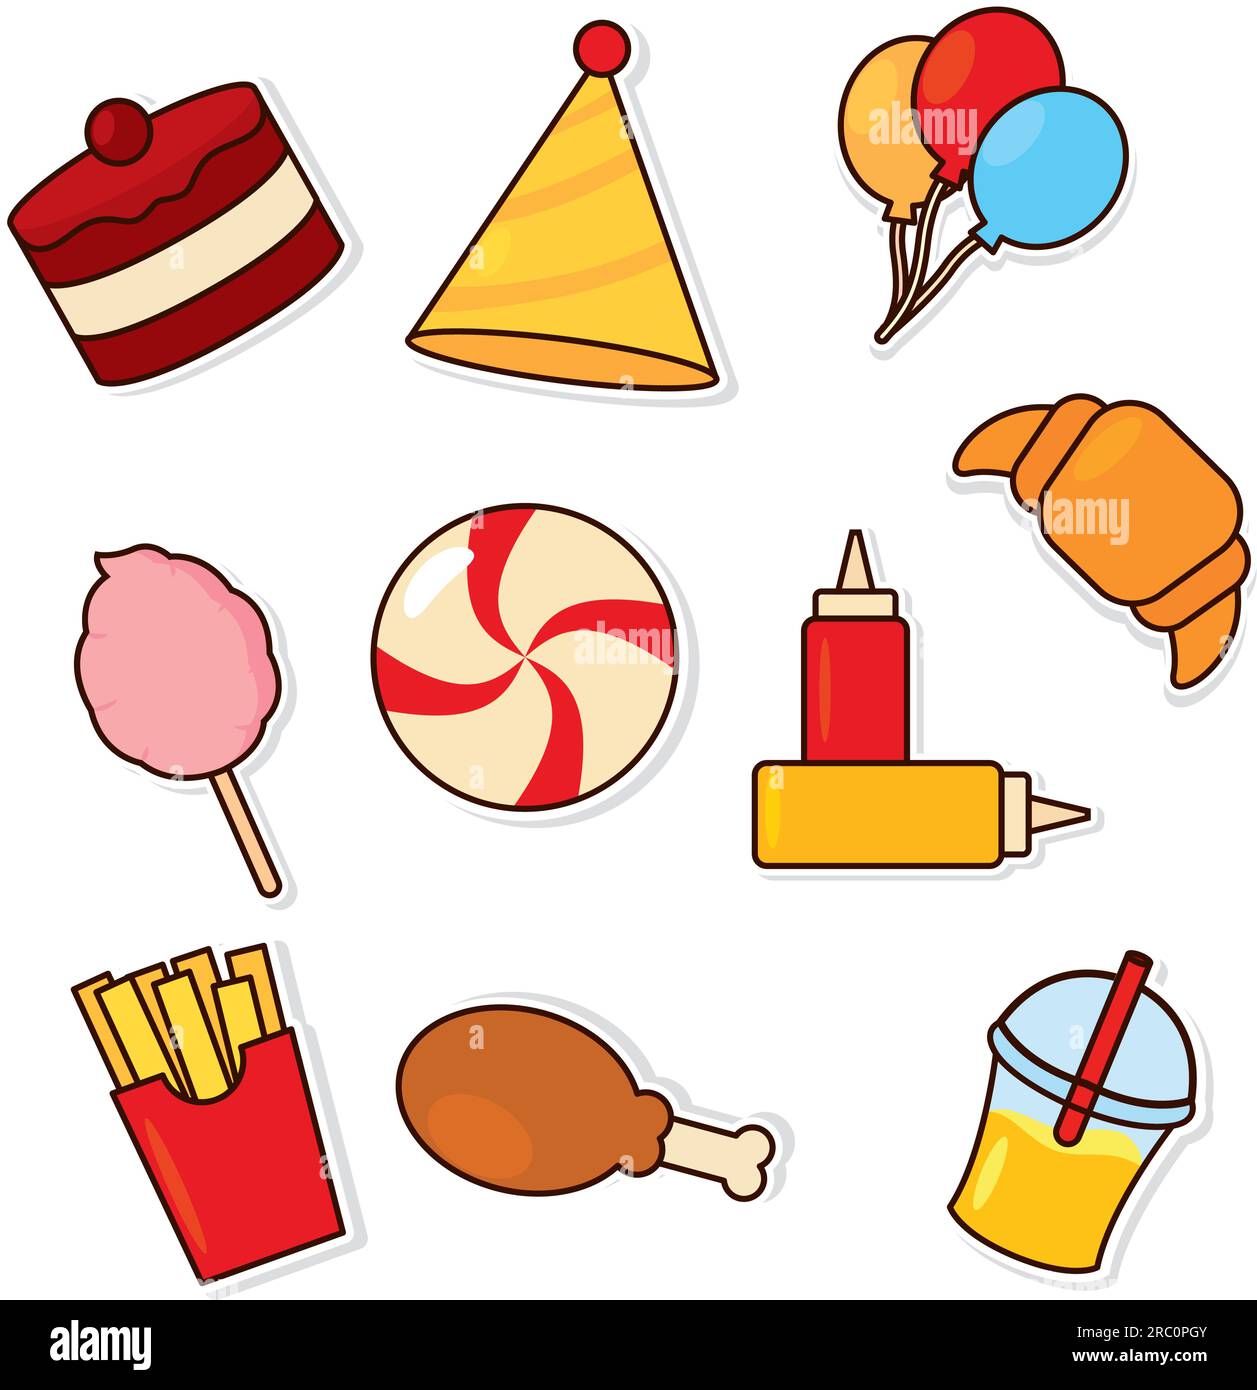 Set of colored food emoji icons Vector Stock Vector